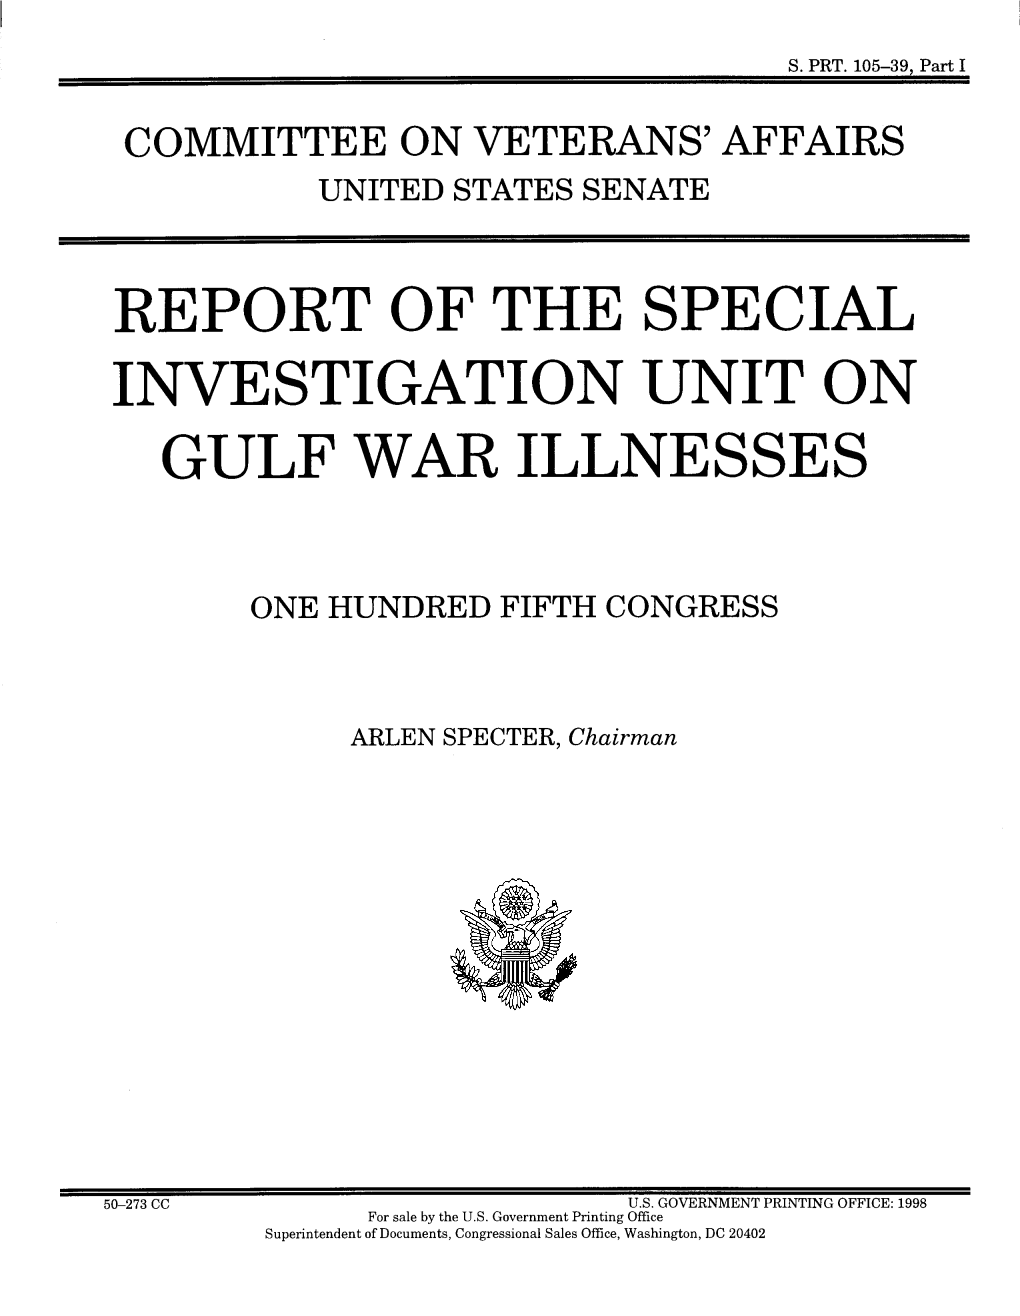 Report of the Special Investigation Unit on Gulf War Illnesses